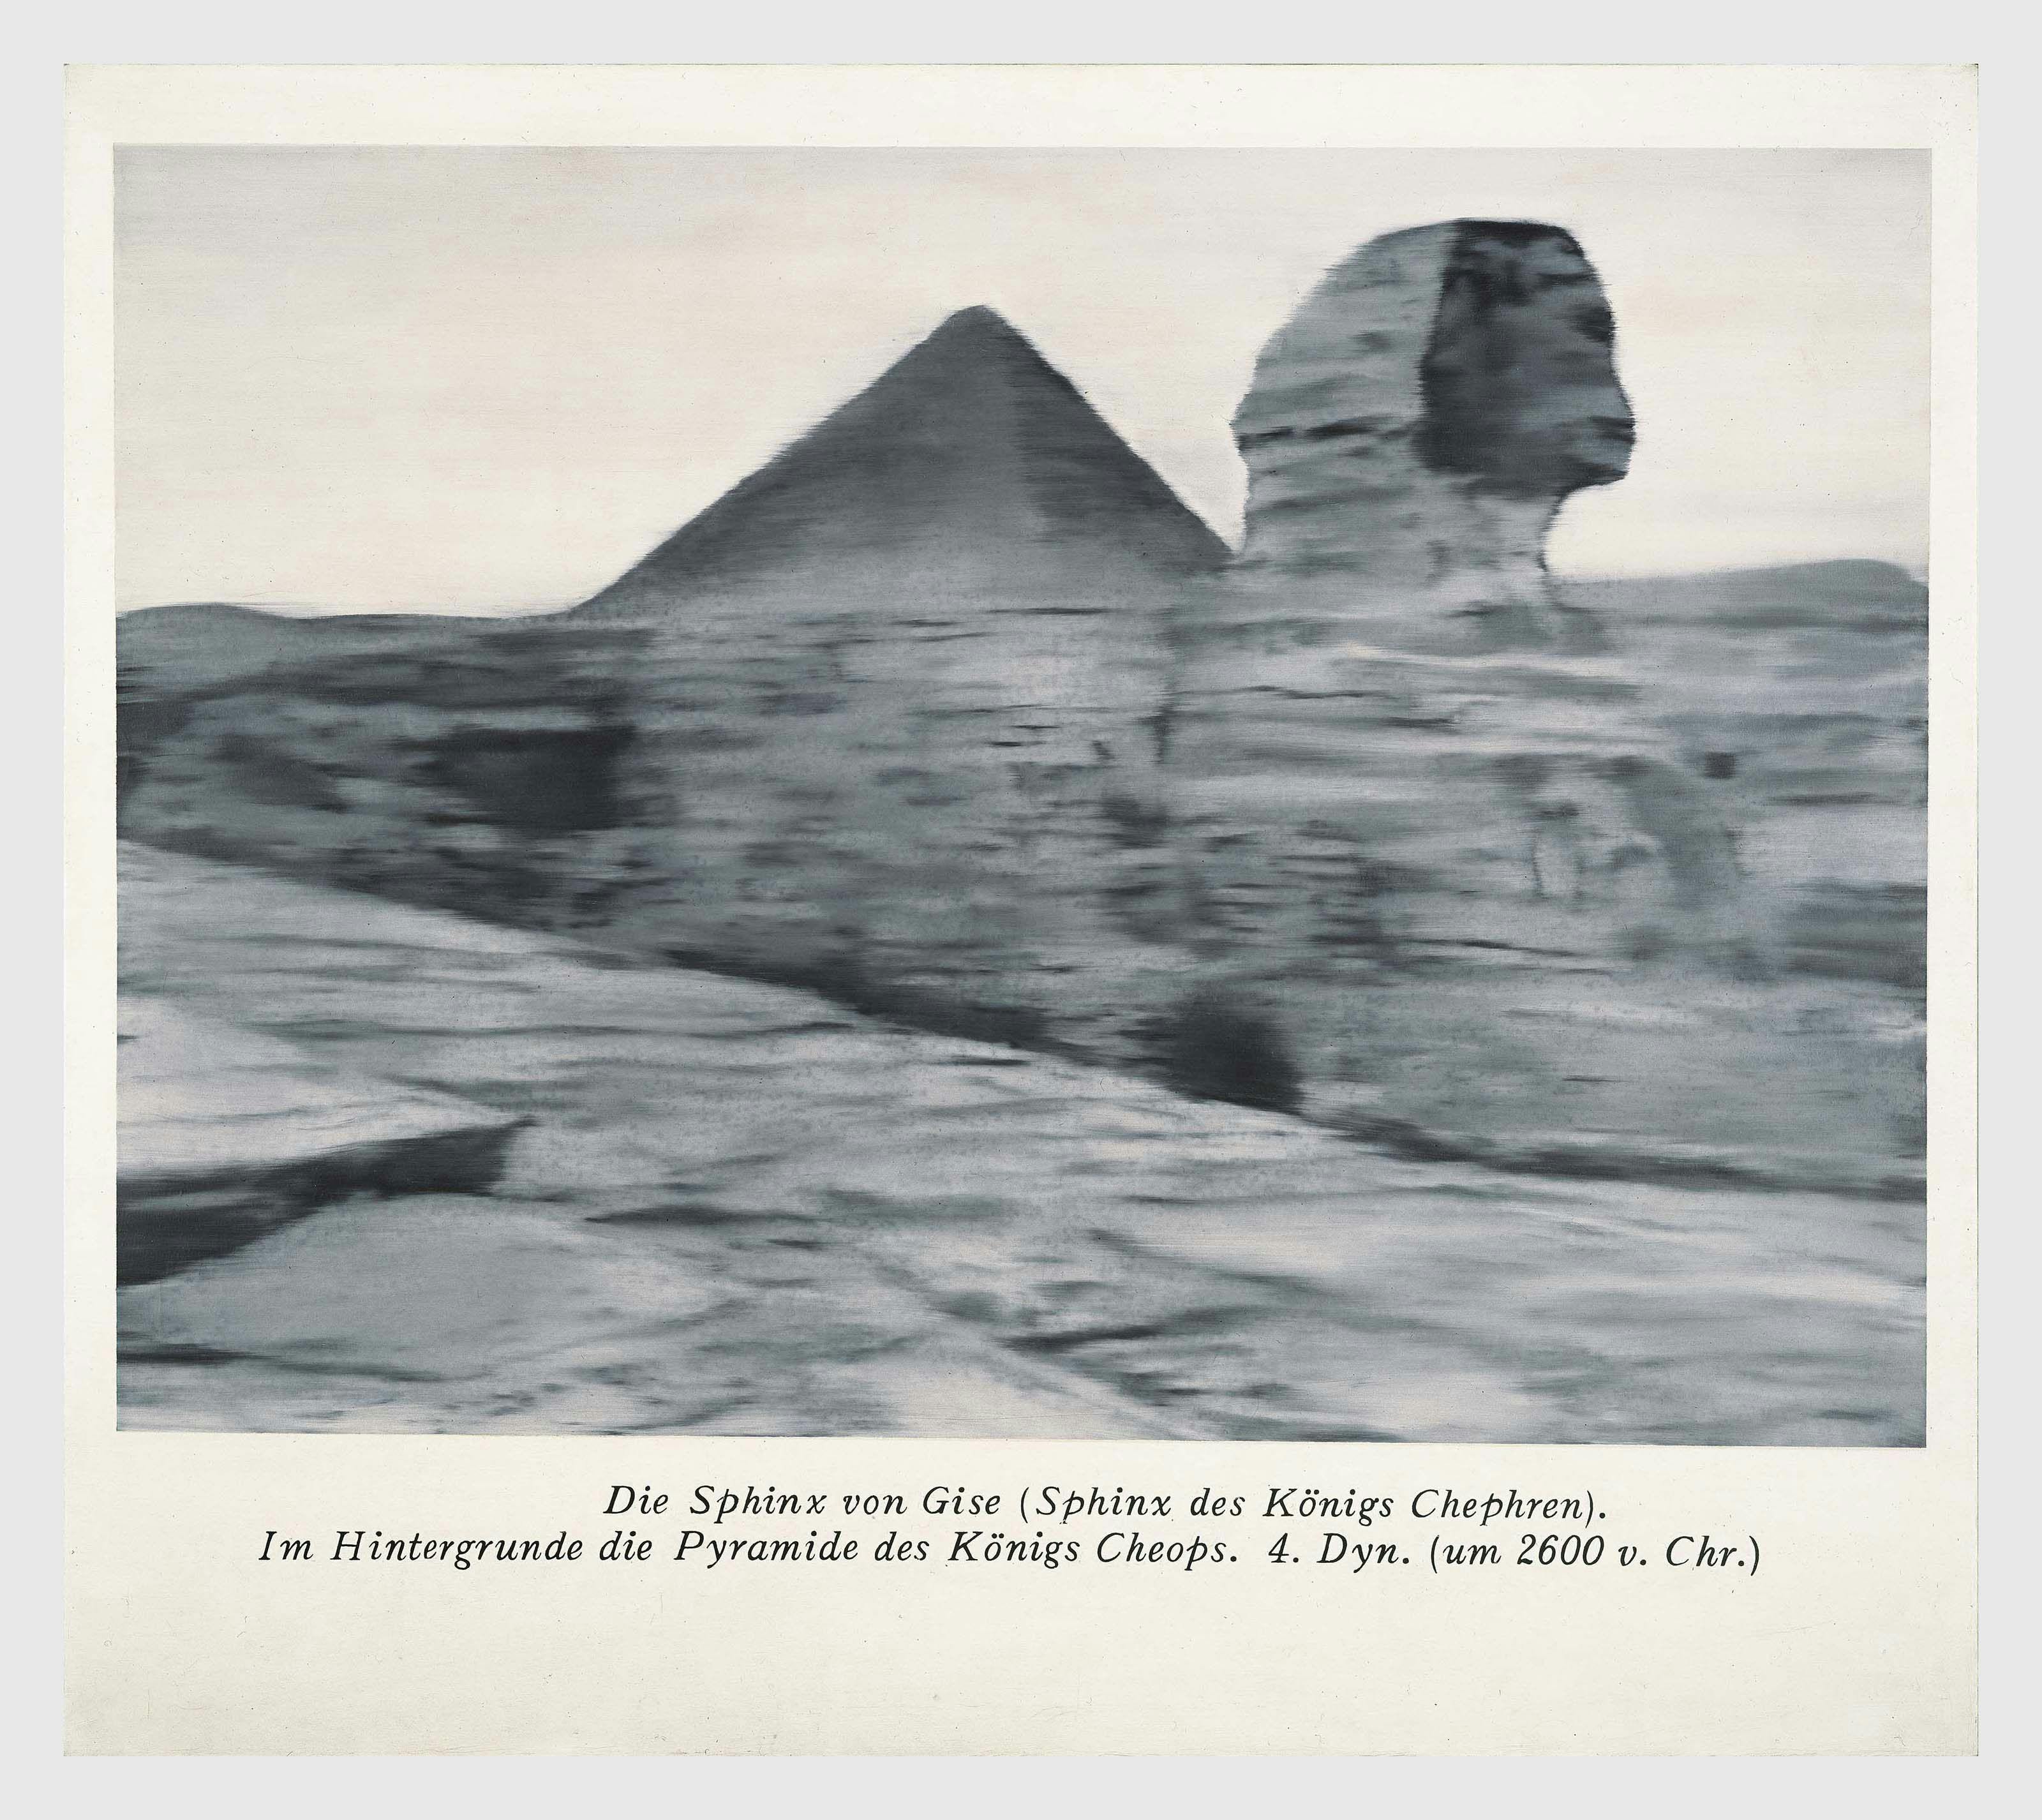 A painting by Gerhard Richter, titled Grosse Sphinx von Gise (Great Sphinx of Gizeh), dated 1965.